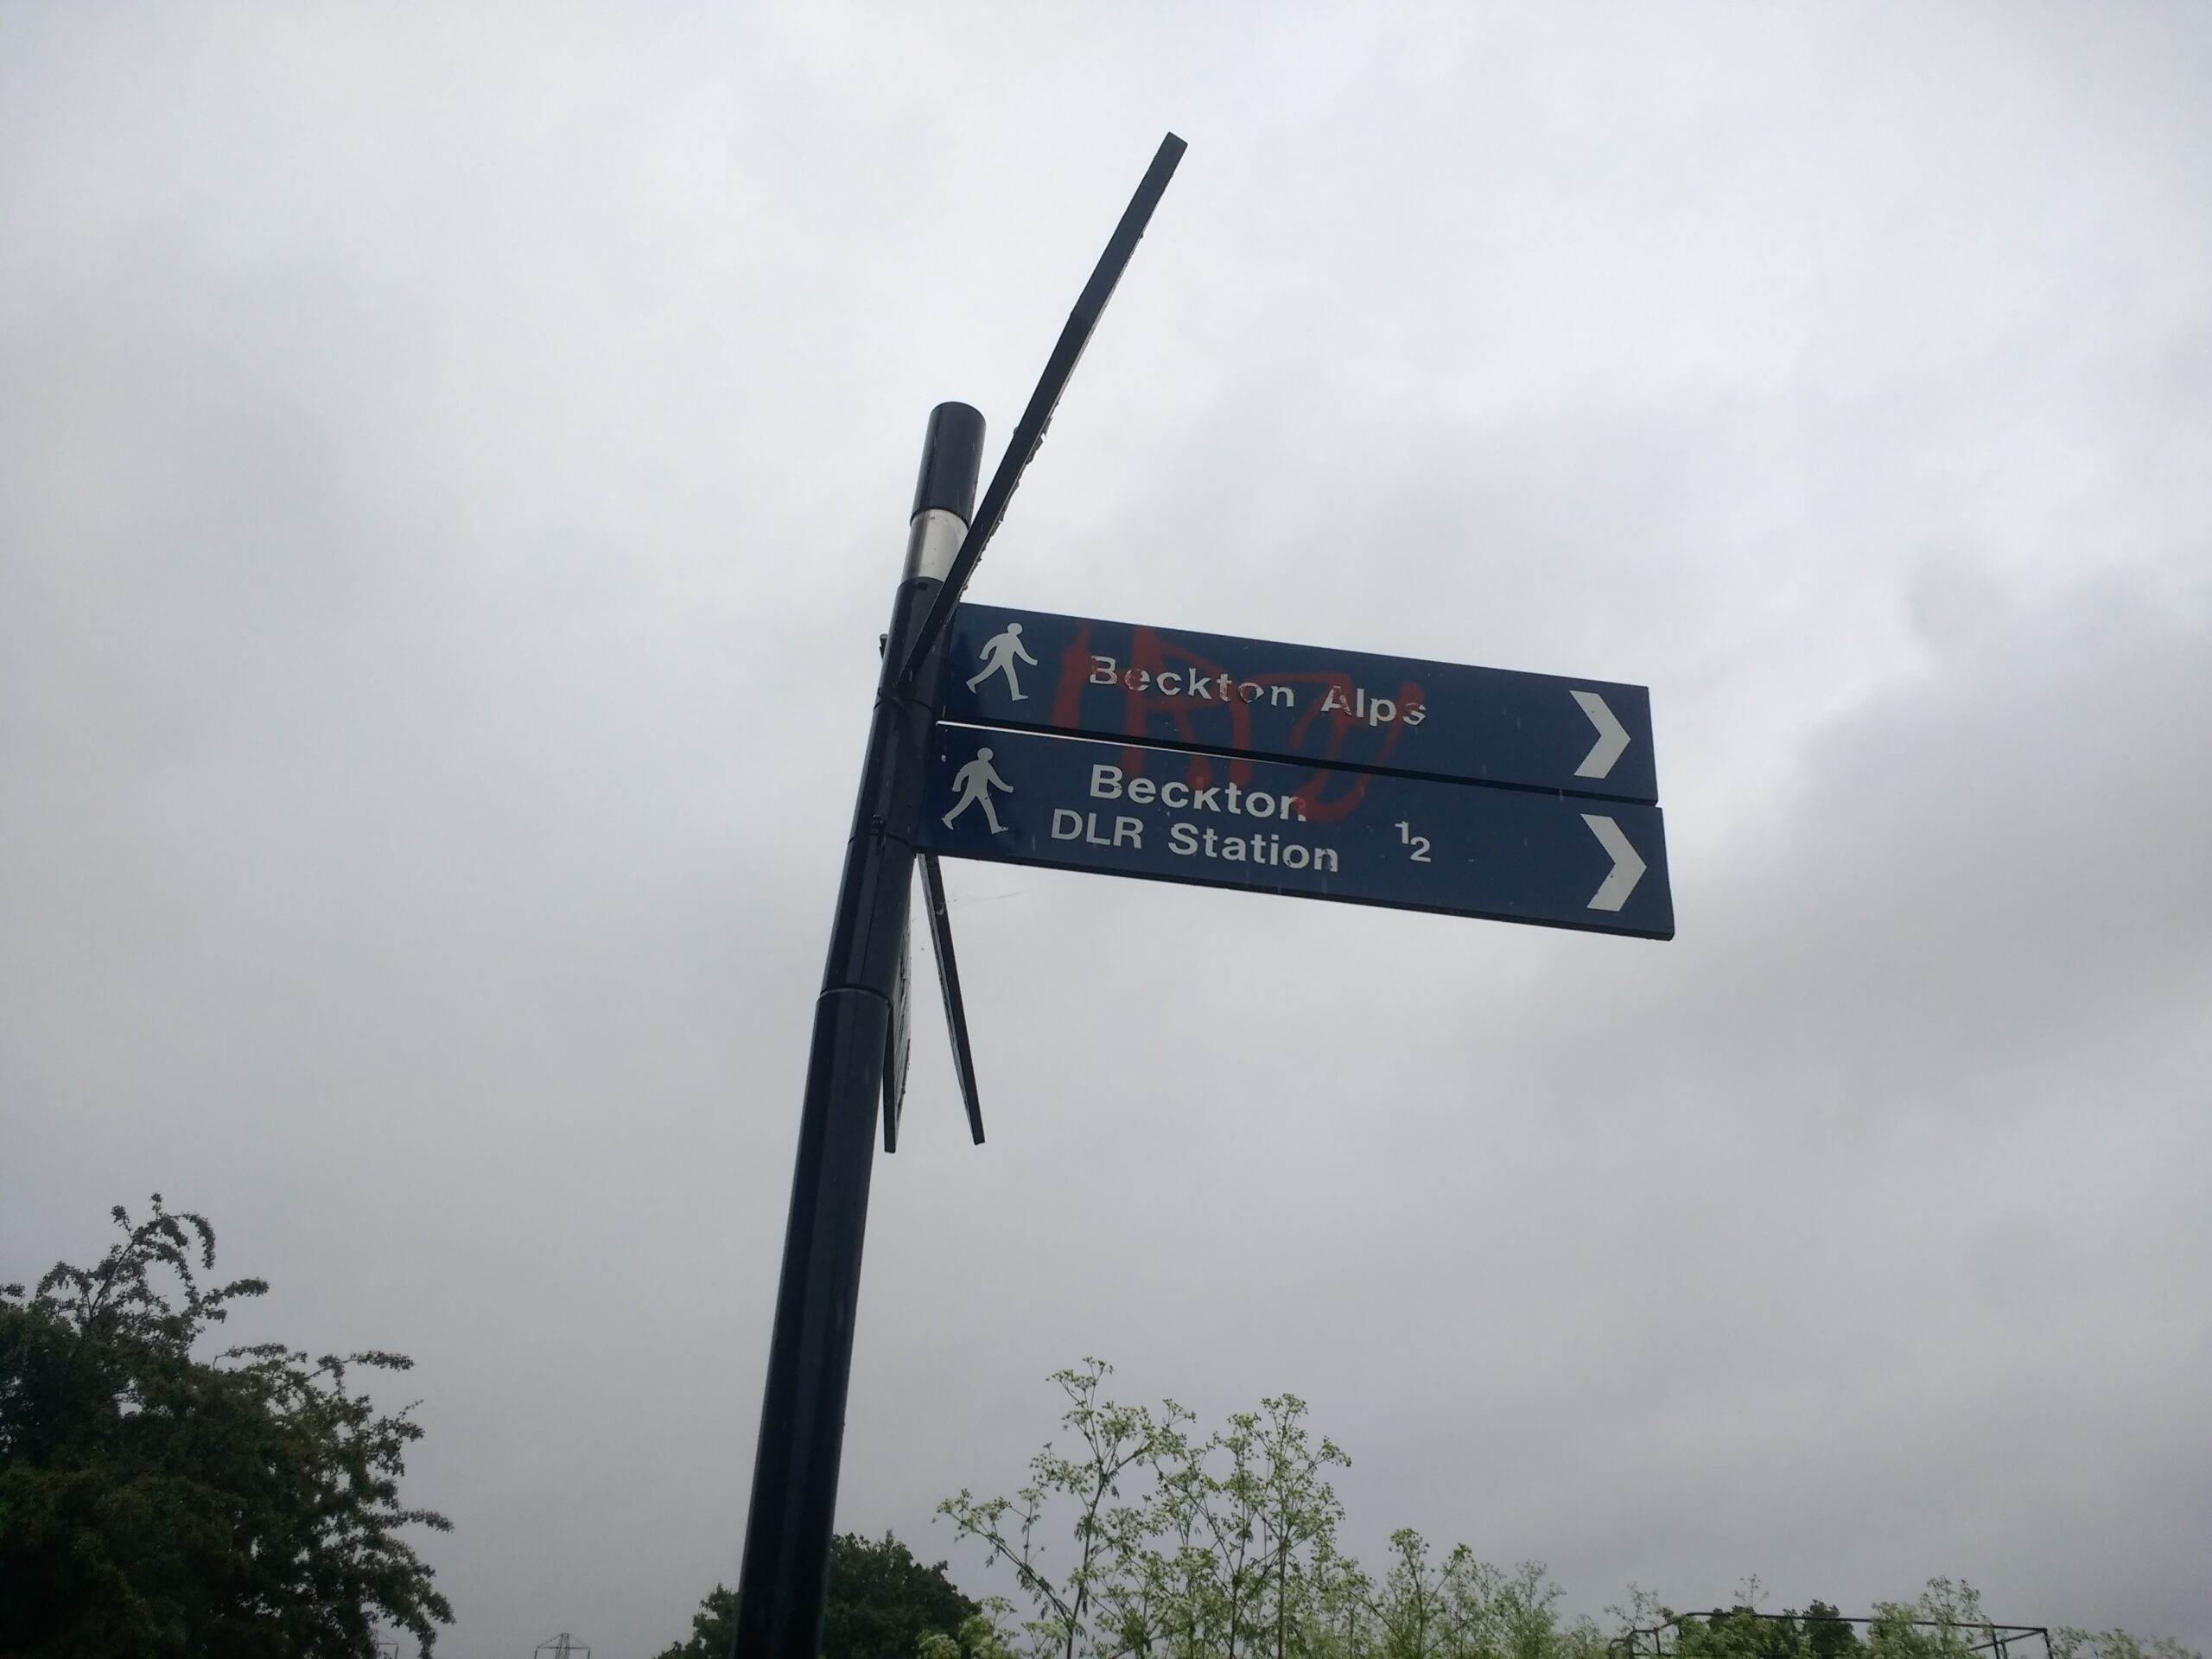 A photogrpah of the top section of a multi-directional signpost points right towards the 'BEckton Alp' and below, 'Beckton DLR Station'. The other signs pointing in the other directions are not visible.